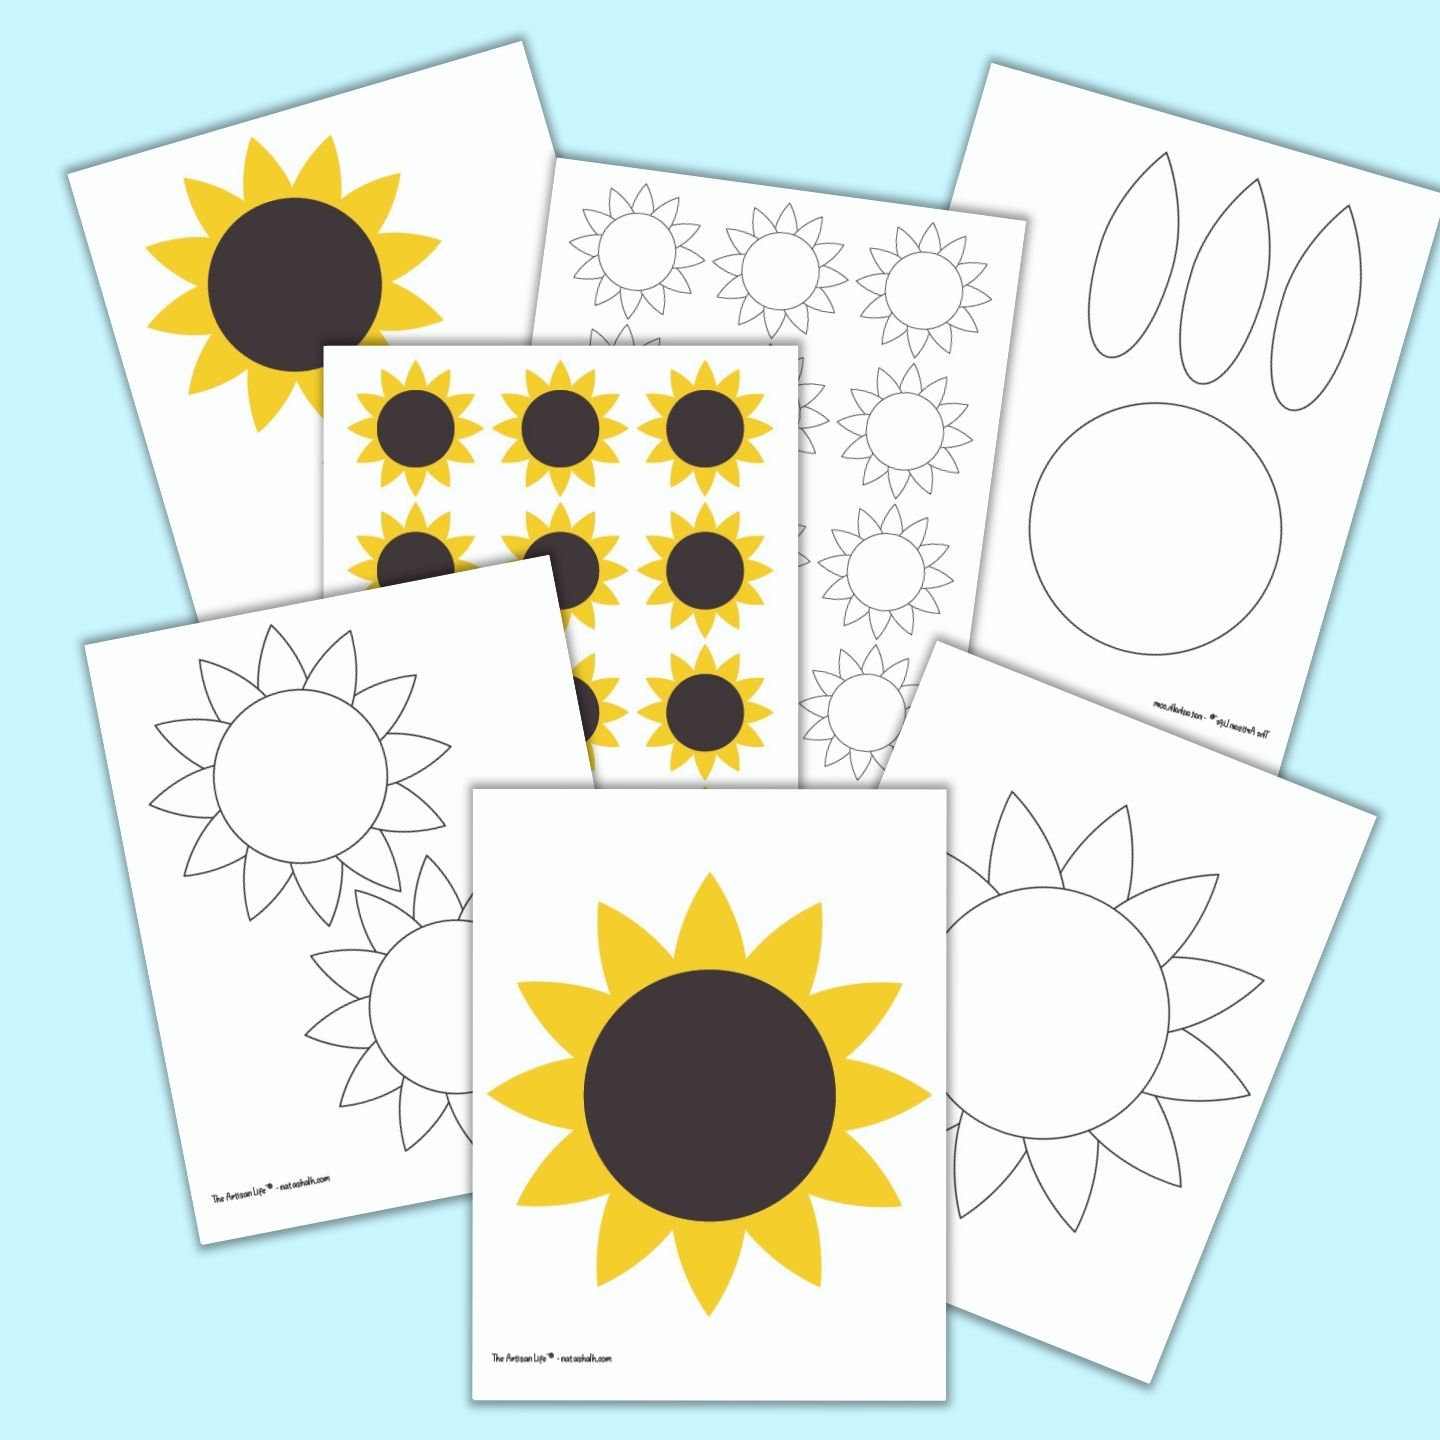 Free Printable Sunflower Templates and Sunflower Patterns The Artisan